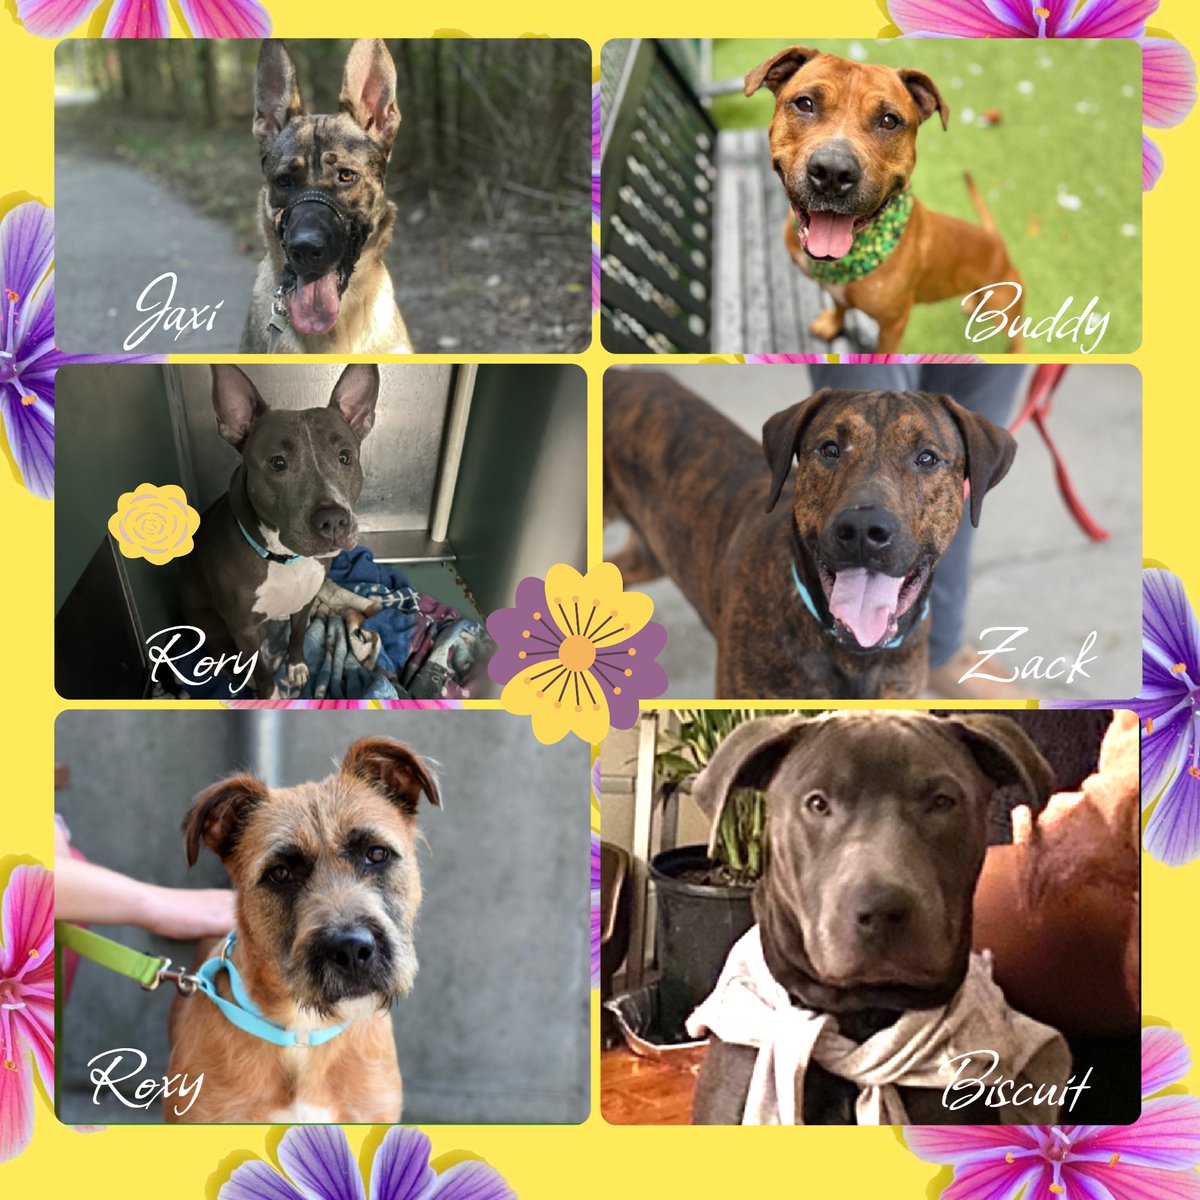 Xena Frost is reserved for rescue 🎉 🚨Jaxi, Buddy, Rory, Zack, Roxy & Biscuit remain under kill command. Anyone interested DM me.